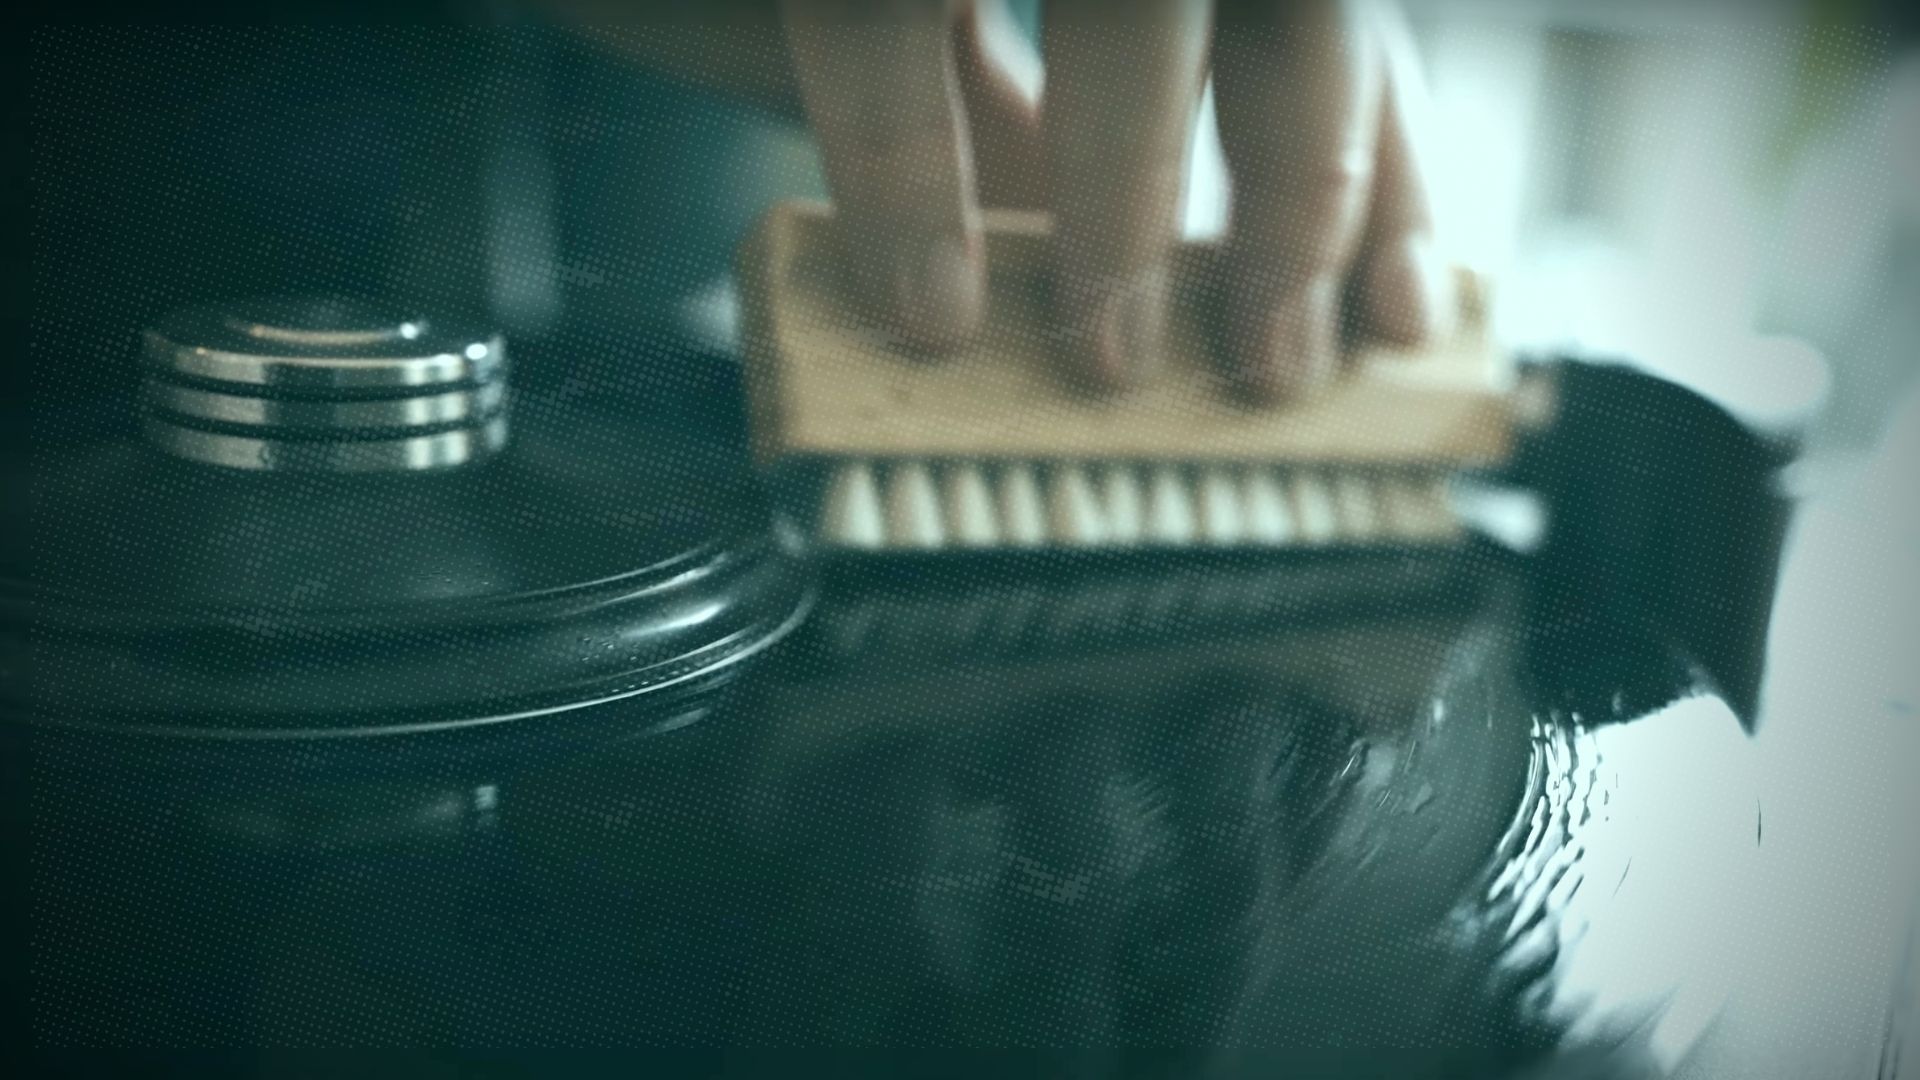 close-up of a person using a brush to clean a vinyl record on a turntable